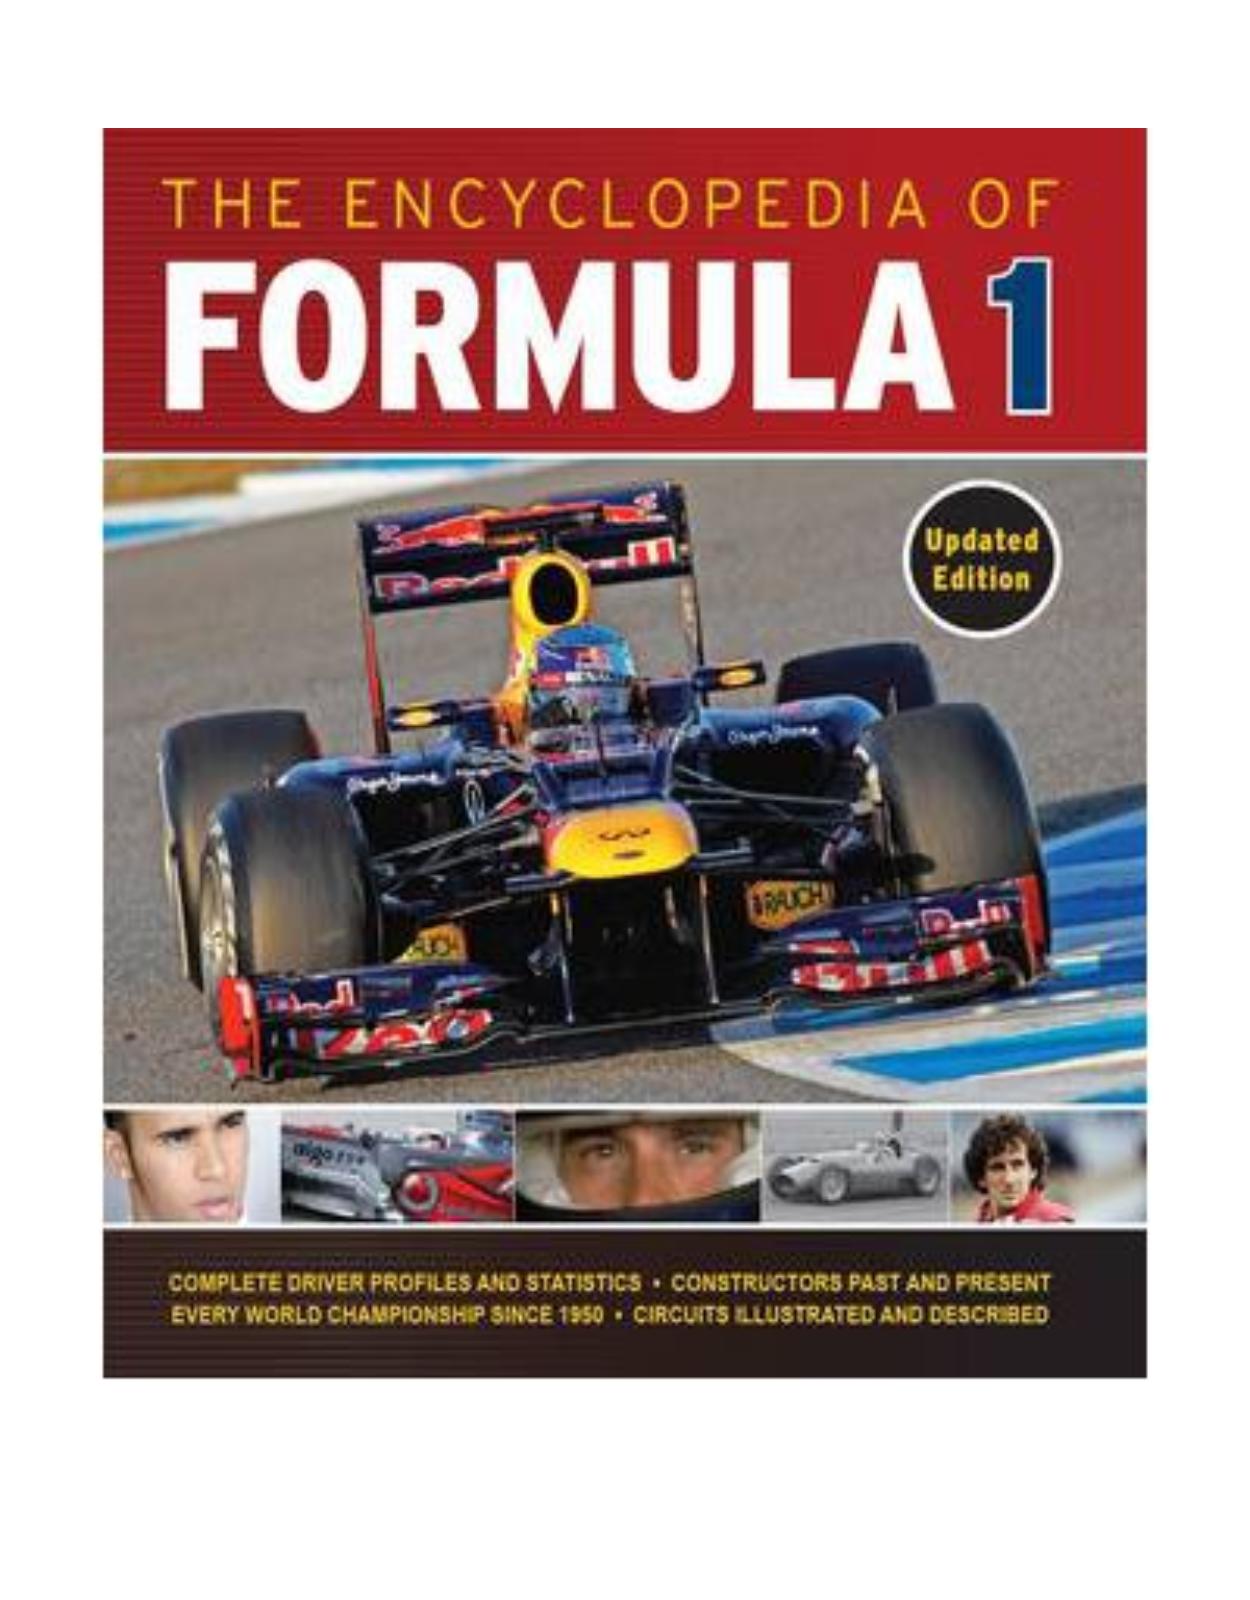 The Complete Encyclopedia of Formula 1